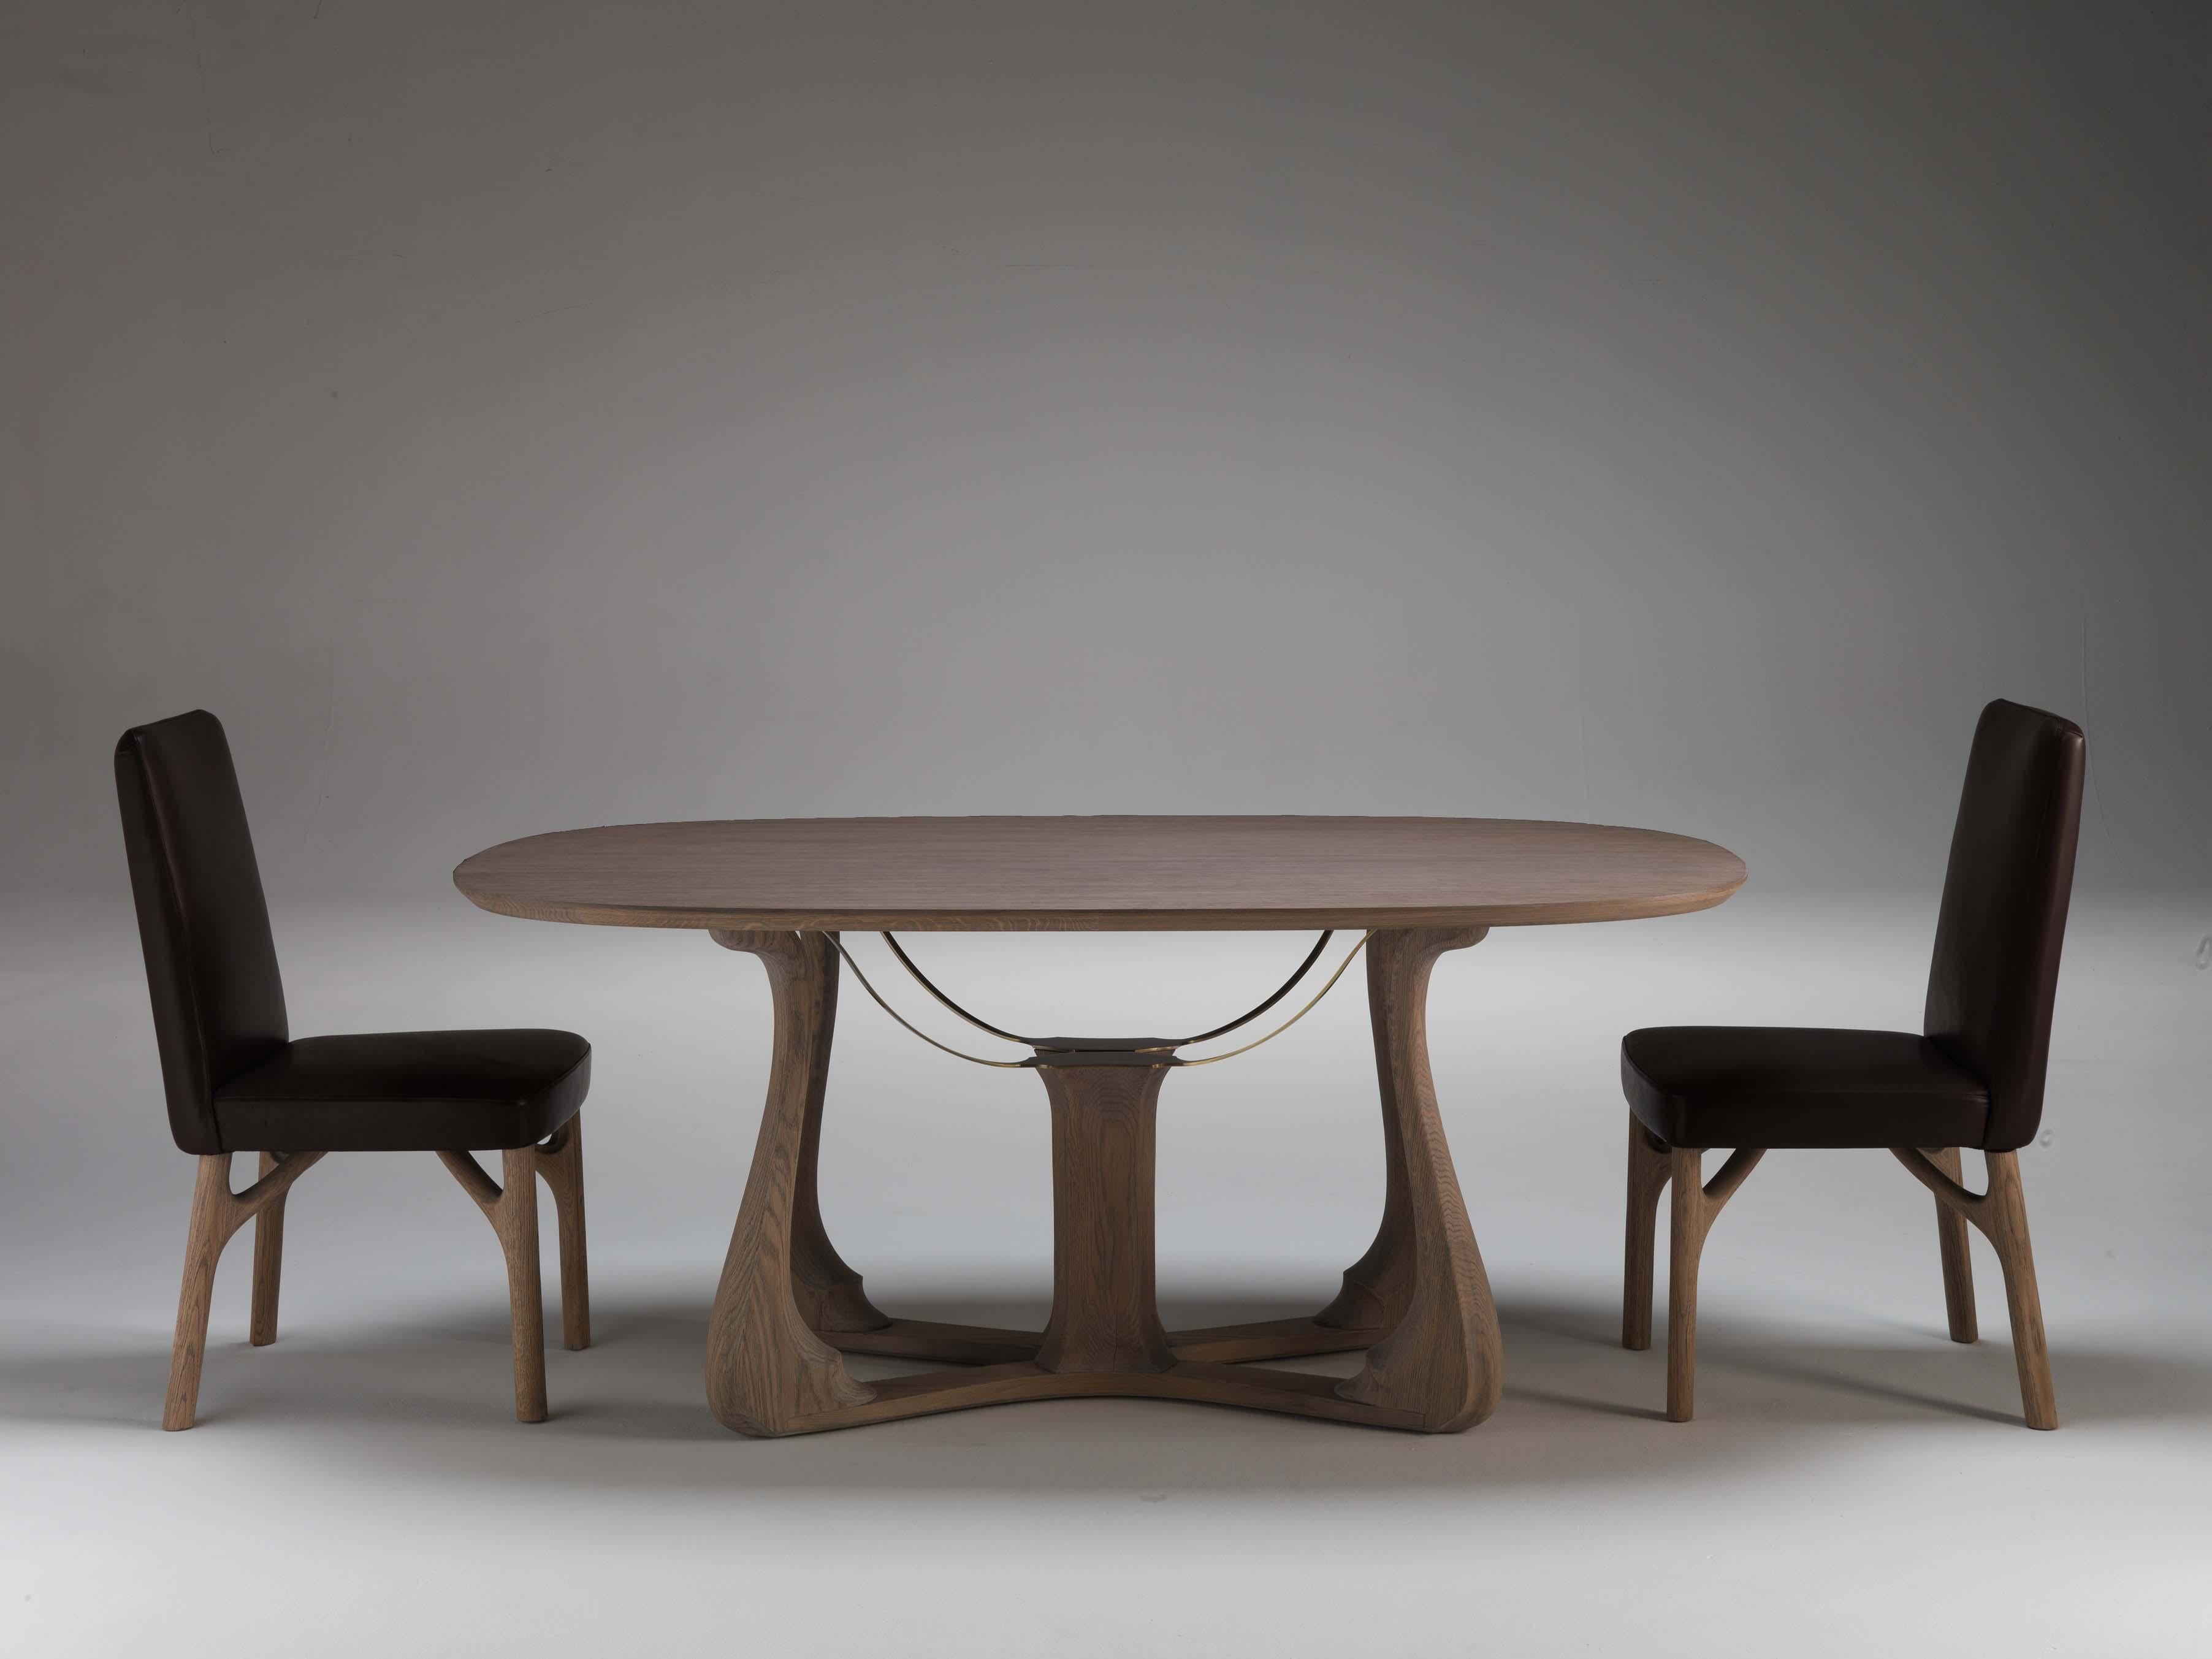 
Introducing the Arpa dining table, a masterpiece designed by Giopato & Coombes that seamlessly marries history with contemporary elegance. This extraordinary table is a visual symphony, with a structure featuring a double set of legs distributed